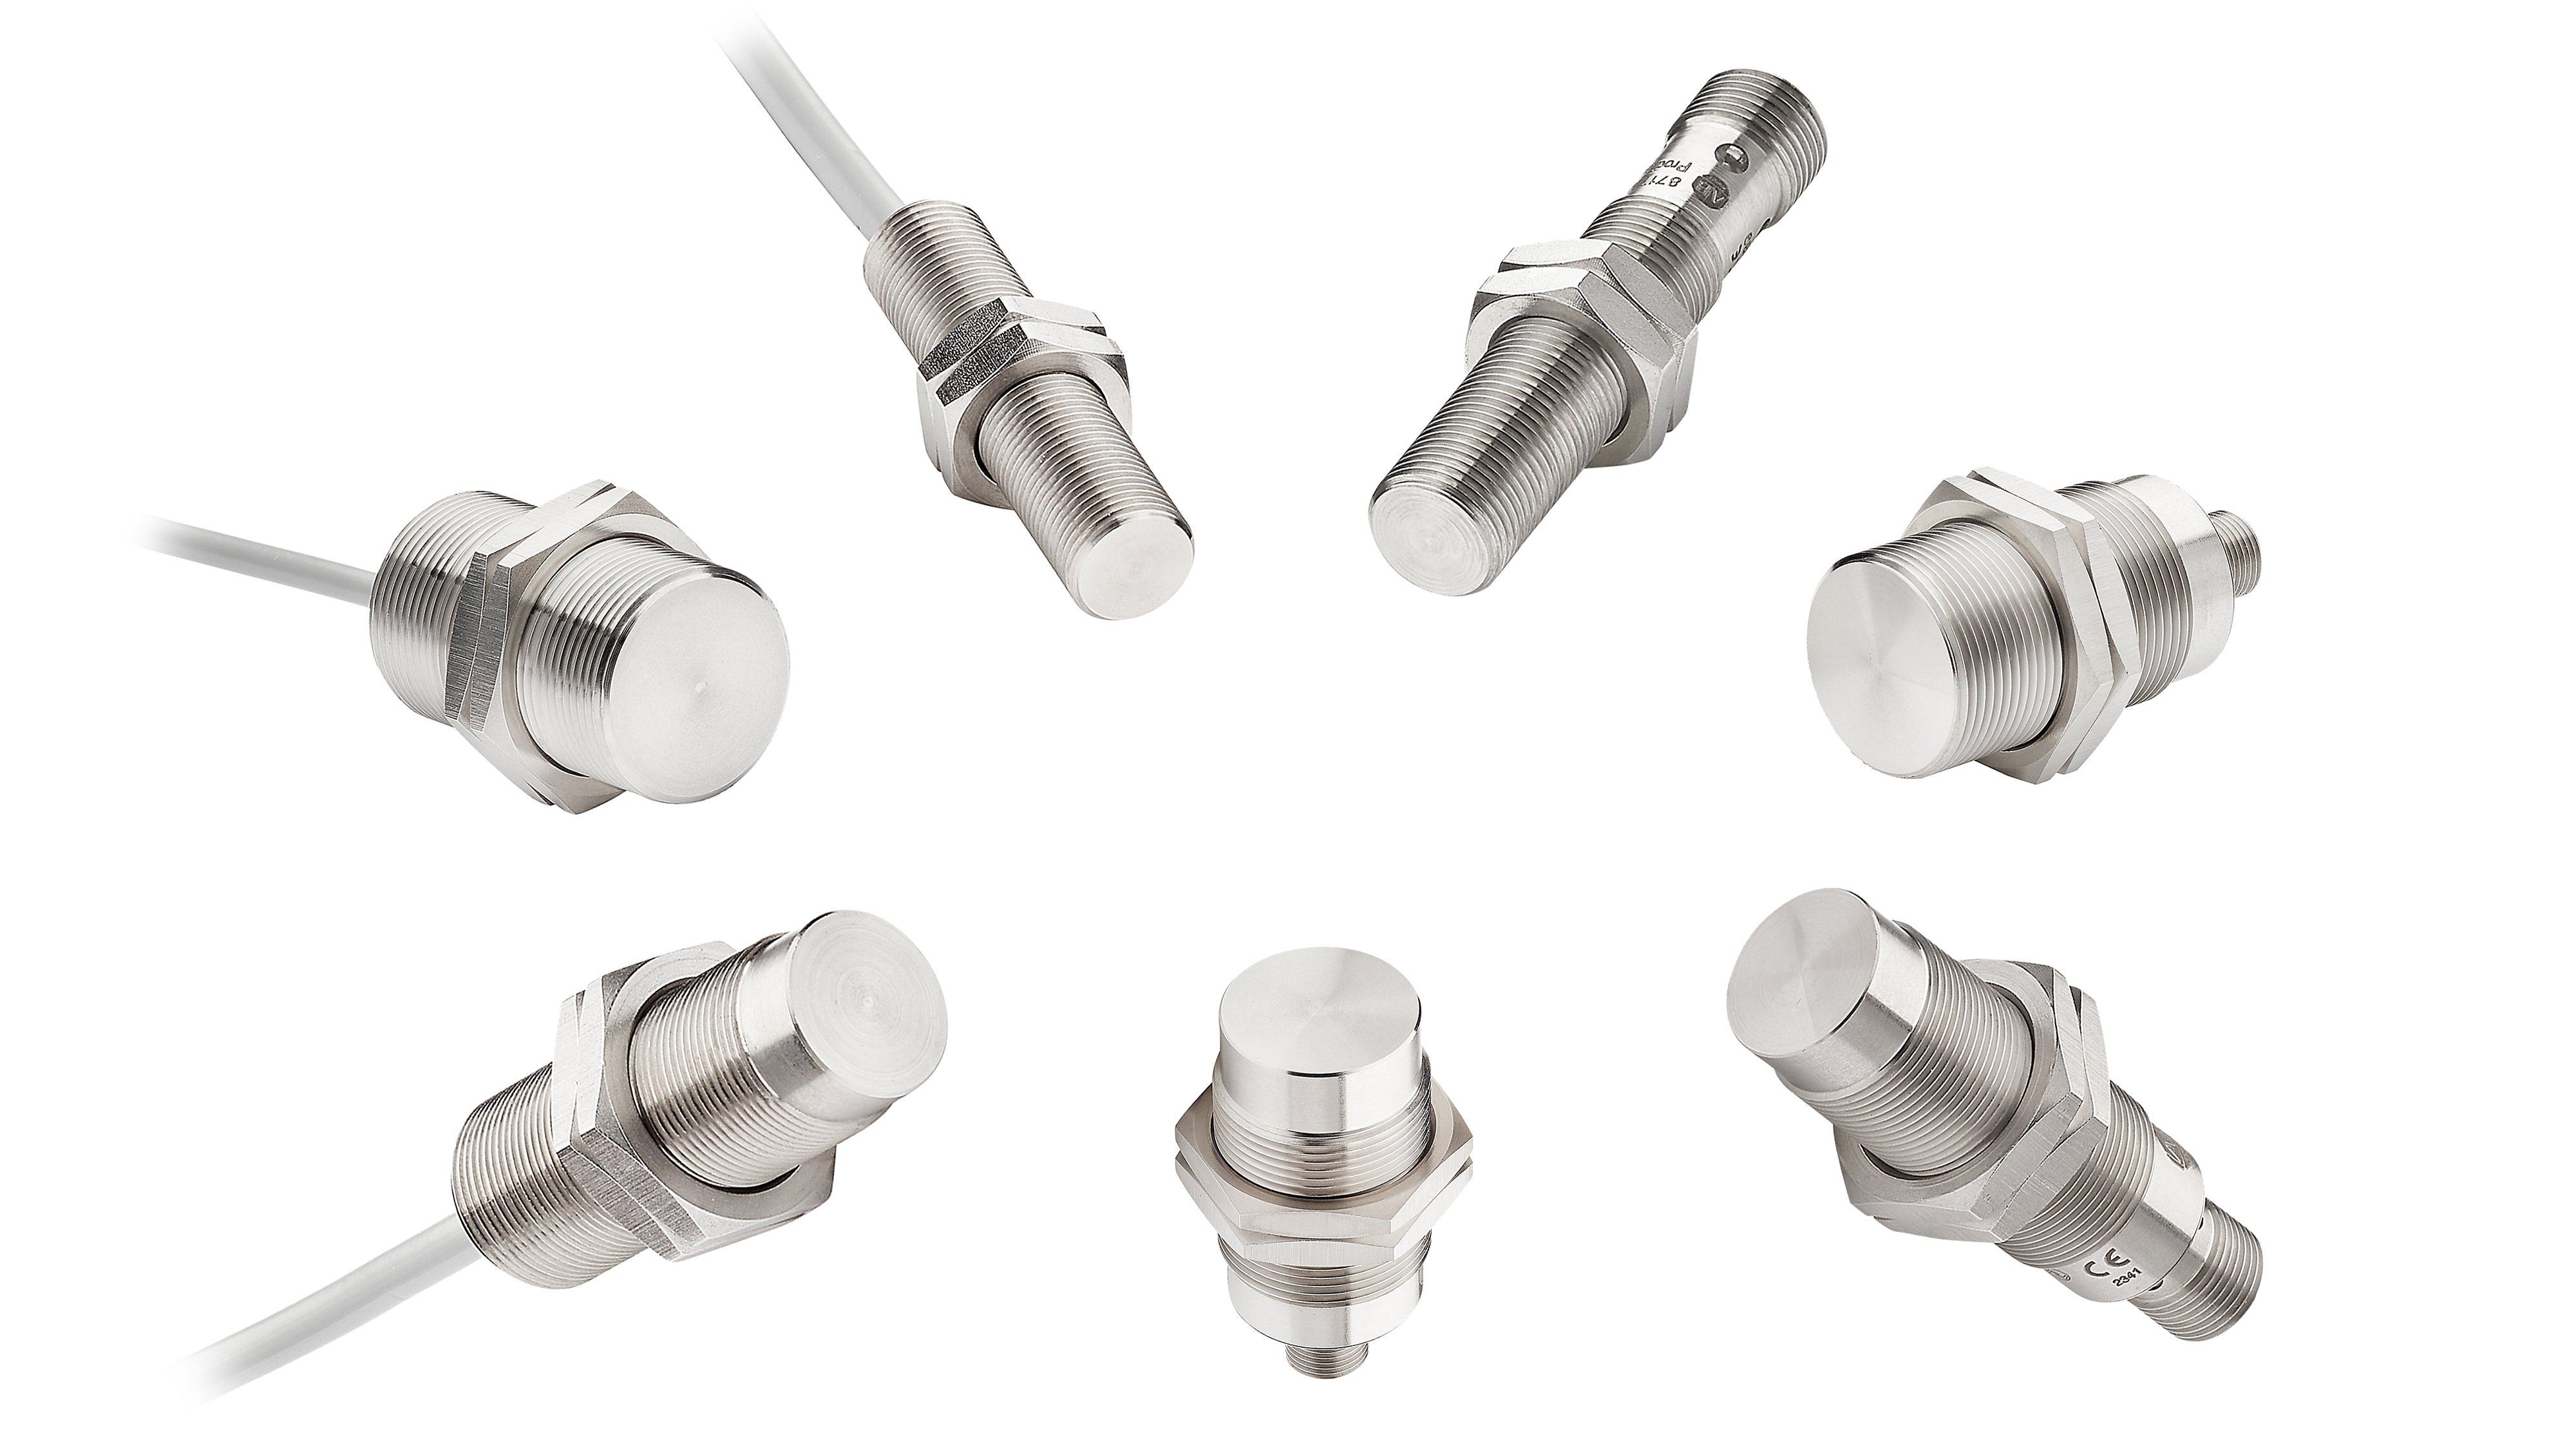 Group image of seven tubular stainless steel sensors with different sized connection terminals.